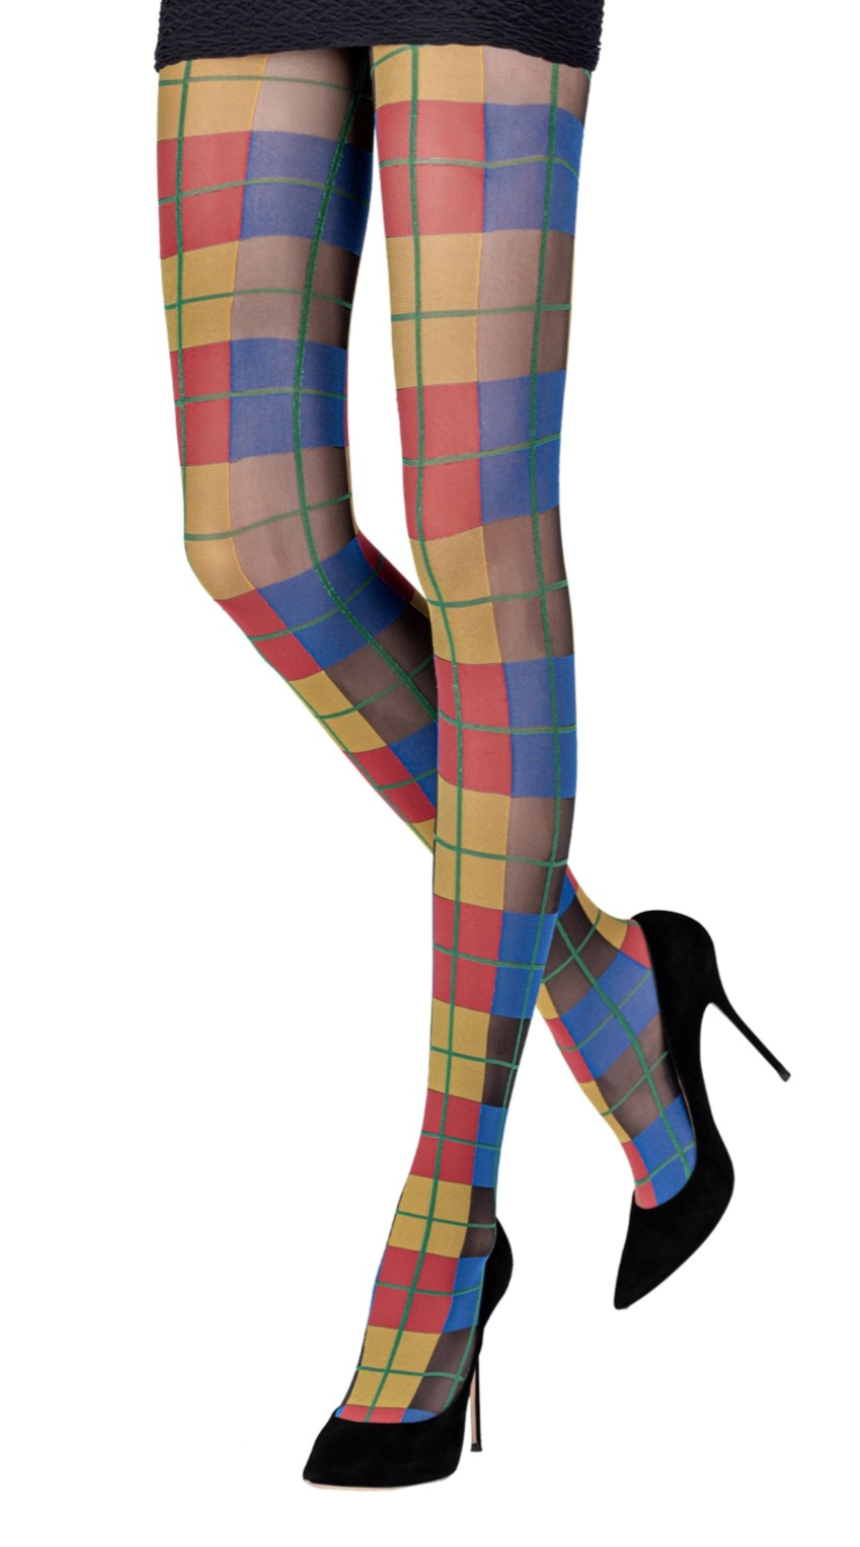 Emilio Cavallini Classic Tartan Tights - Semi opaque fashion tights with a colourful plaid style pattern in red, blue, green and yellow.